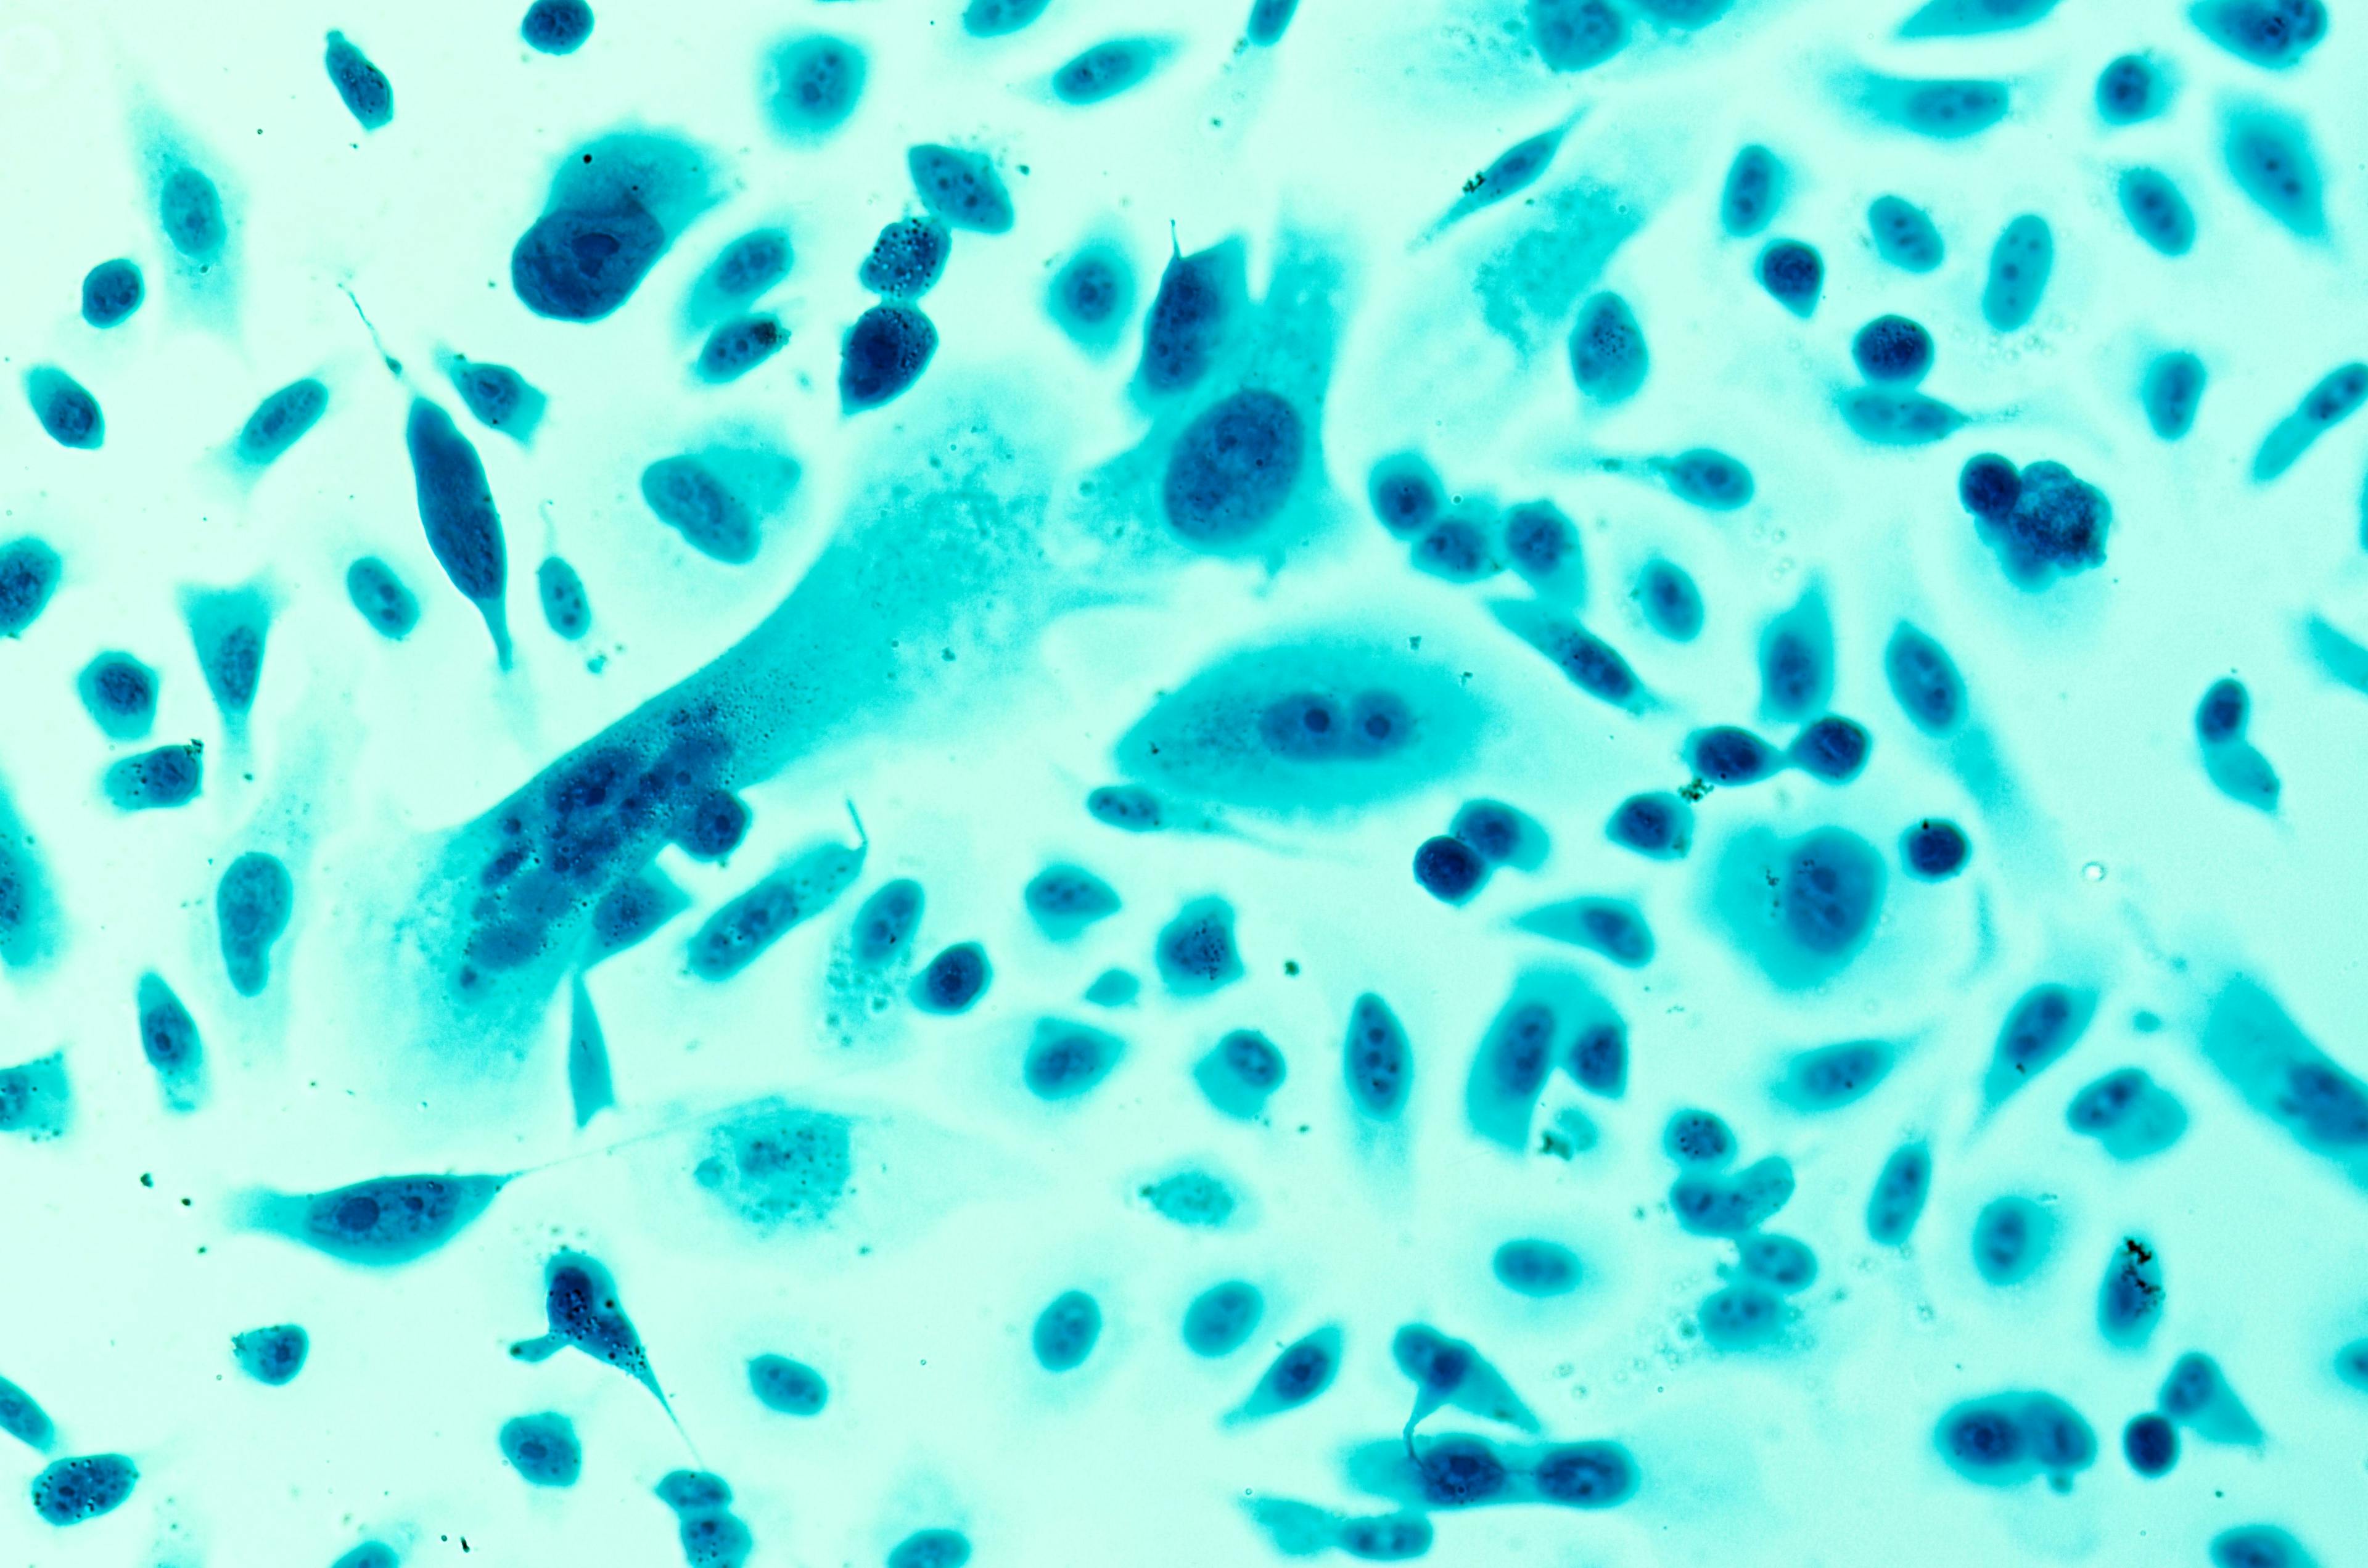 Prostate cancer under the microscope: © heitipaves - stock.adobe.com